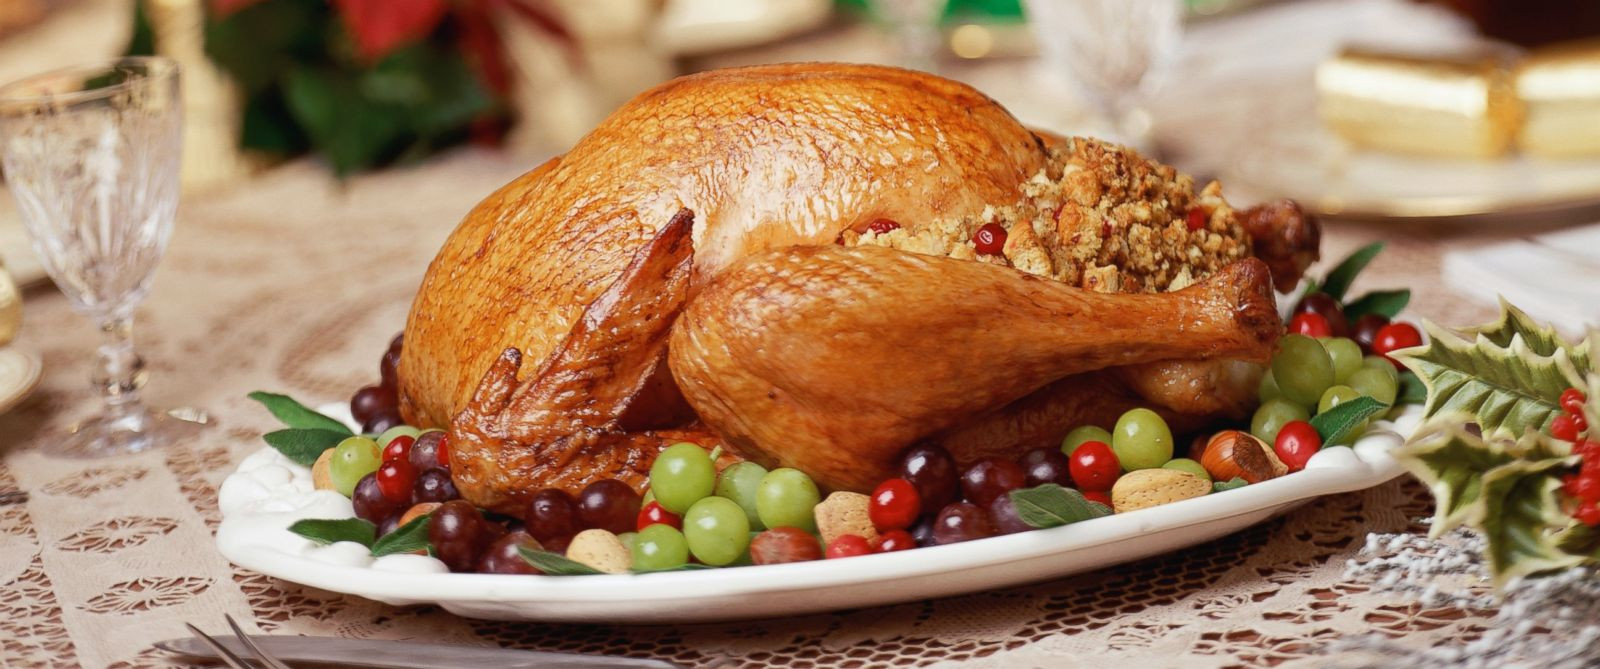 30 Best Thanksgiving Turkey Prices Most Popular Ideas of All Time